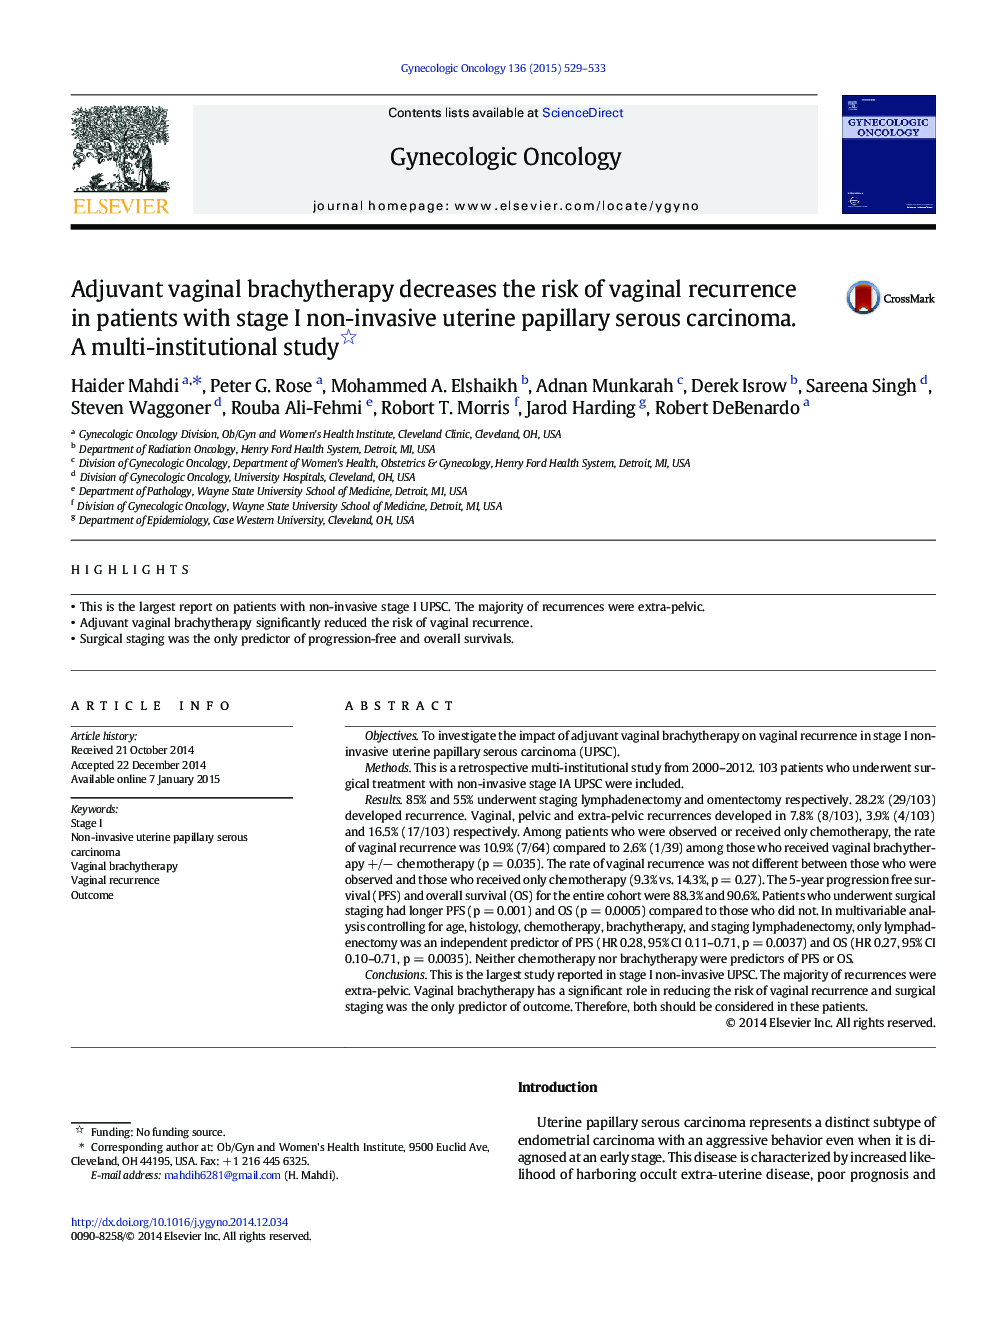 Adjuvant vaginal brachytherapy decreases the risk of vaginal recurrence in patients with stage I non-invasive uterine papillary serous carcinoma. A multi-institutional study 